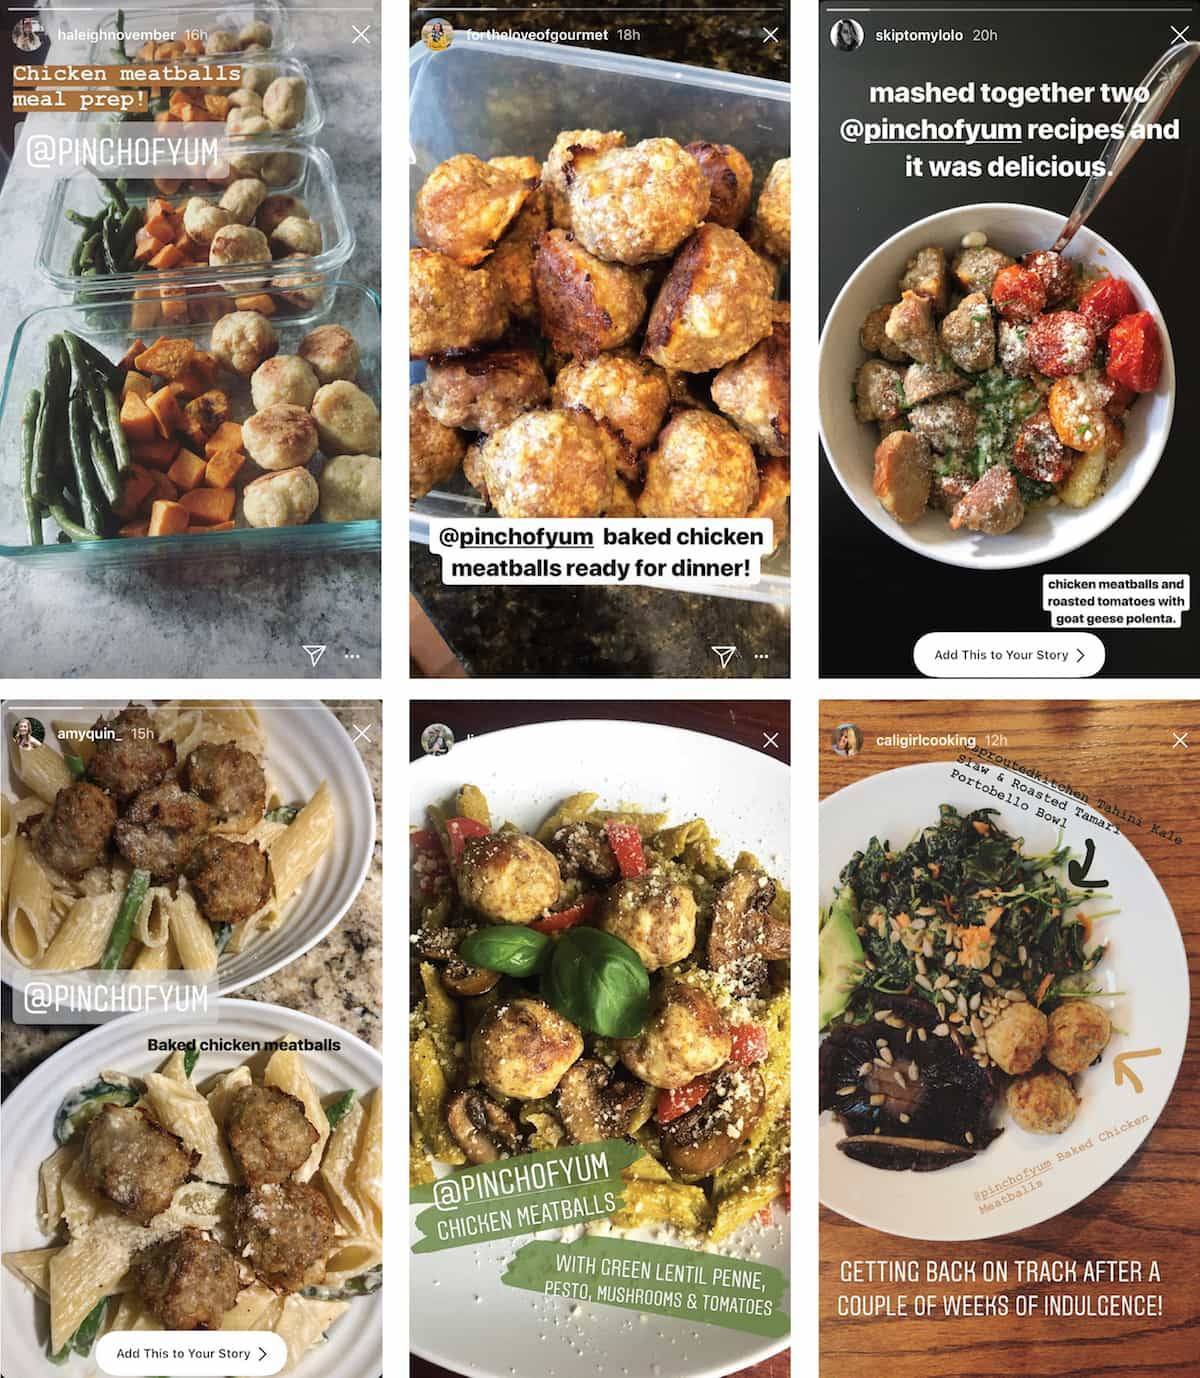 Collage of user generated content showing readers' images of baked chicken meatballs. 